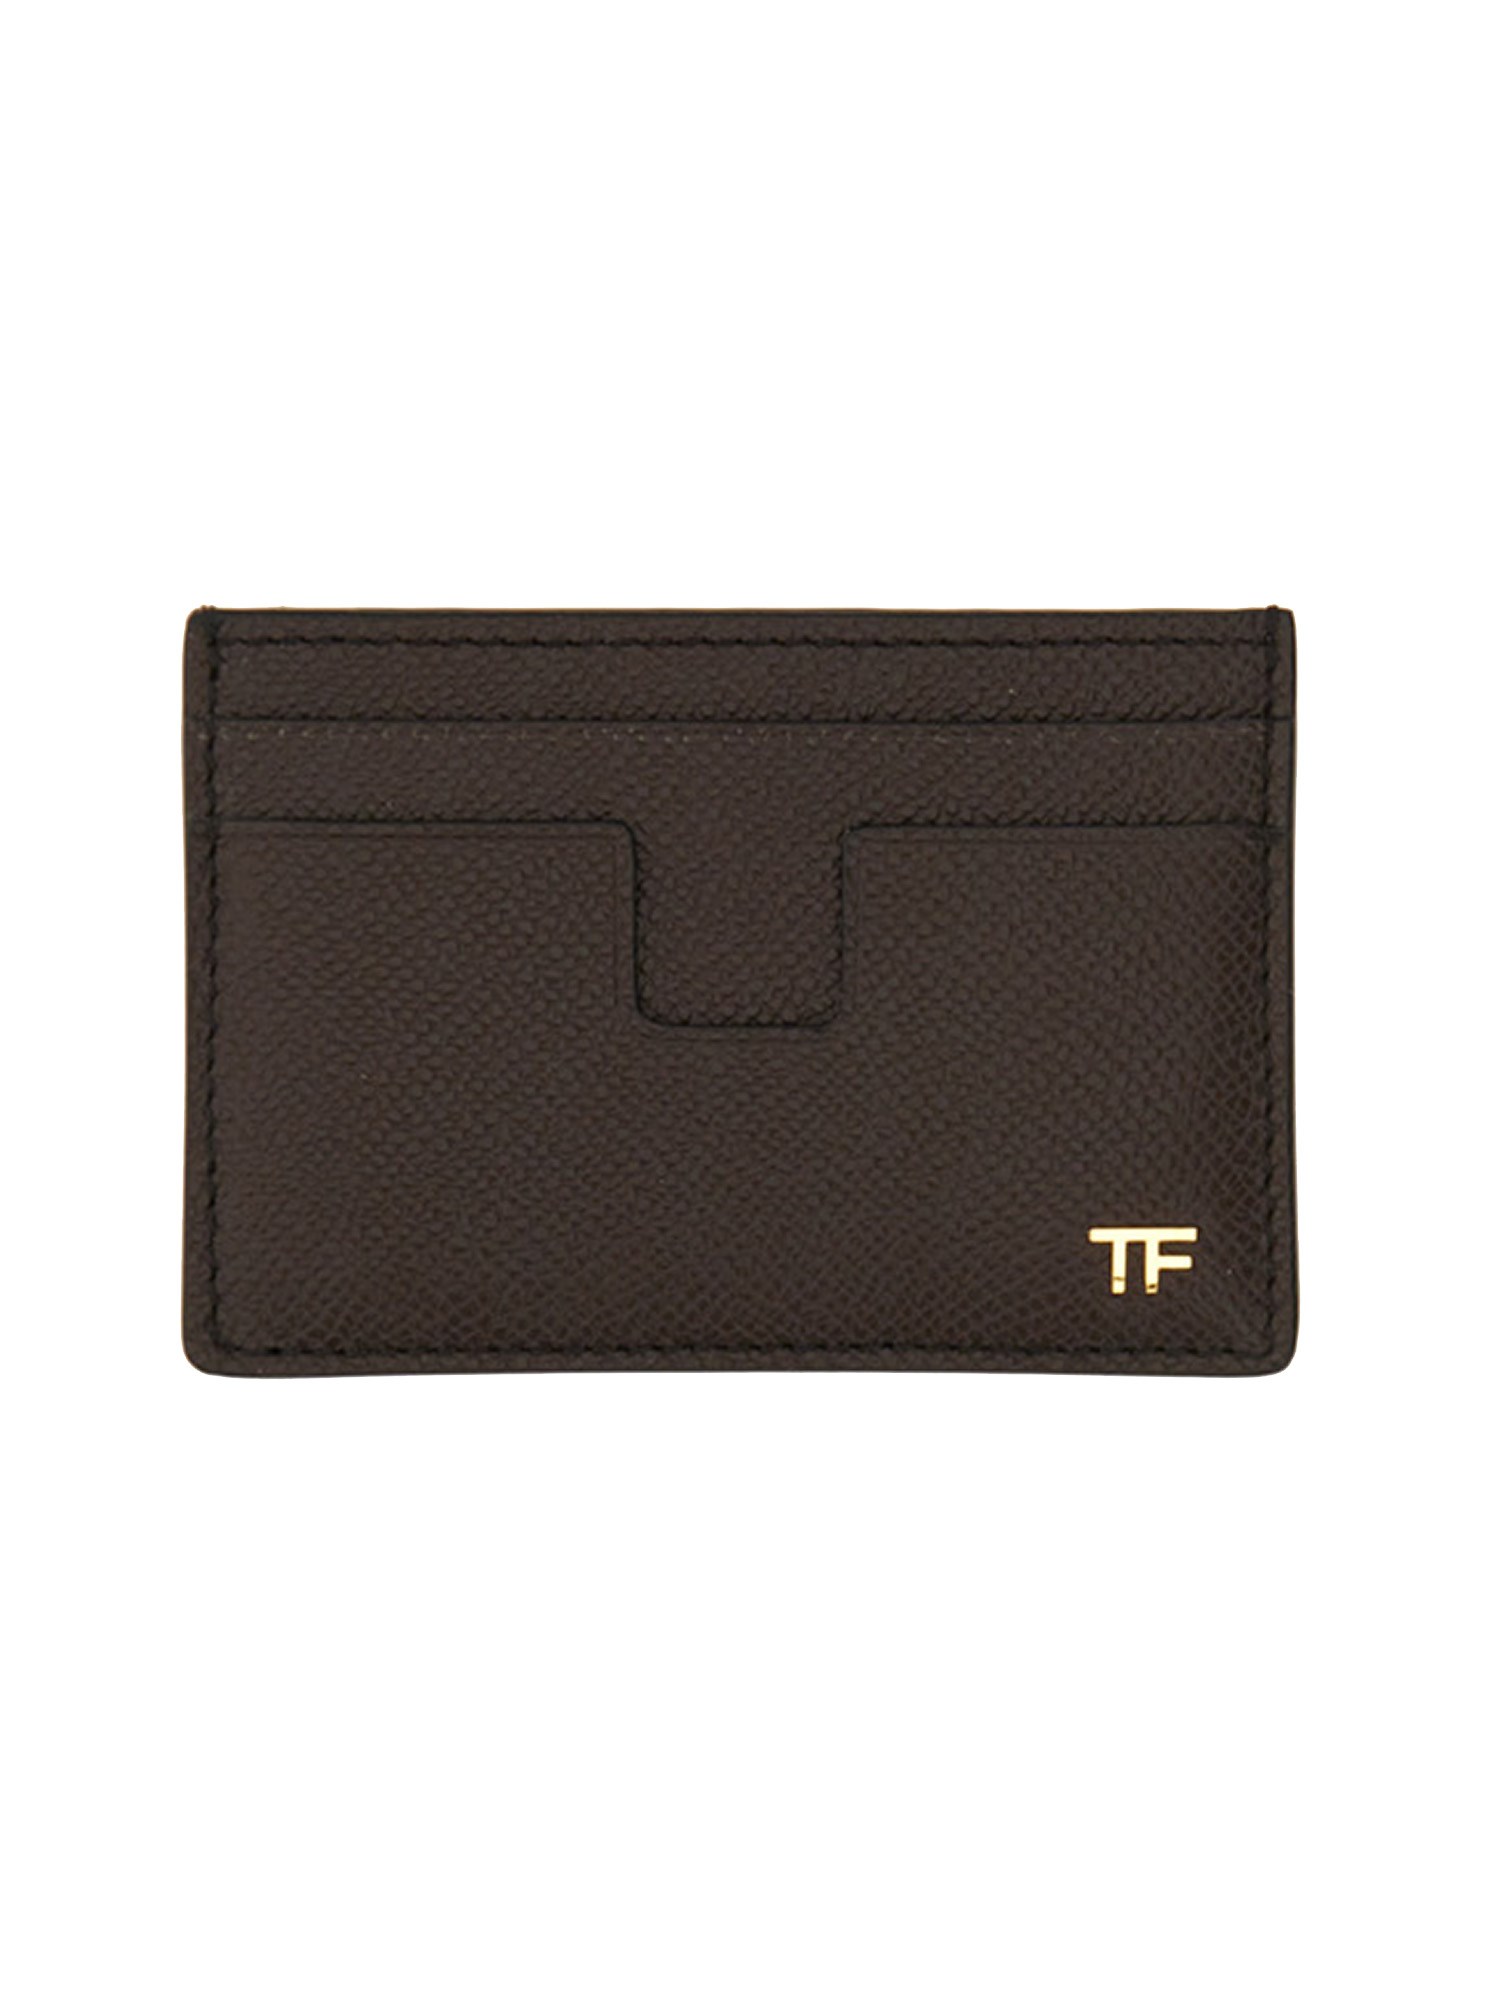 tom ford classic card holder 